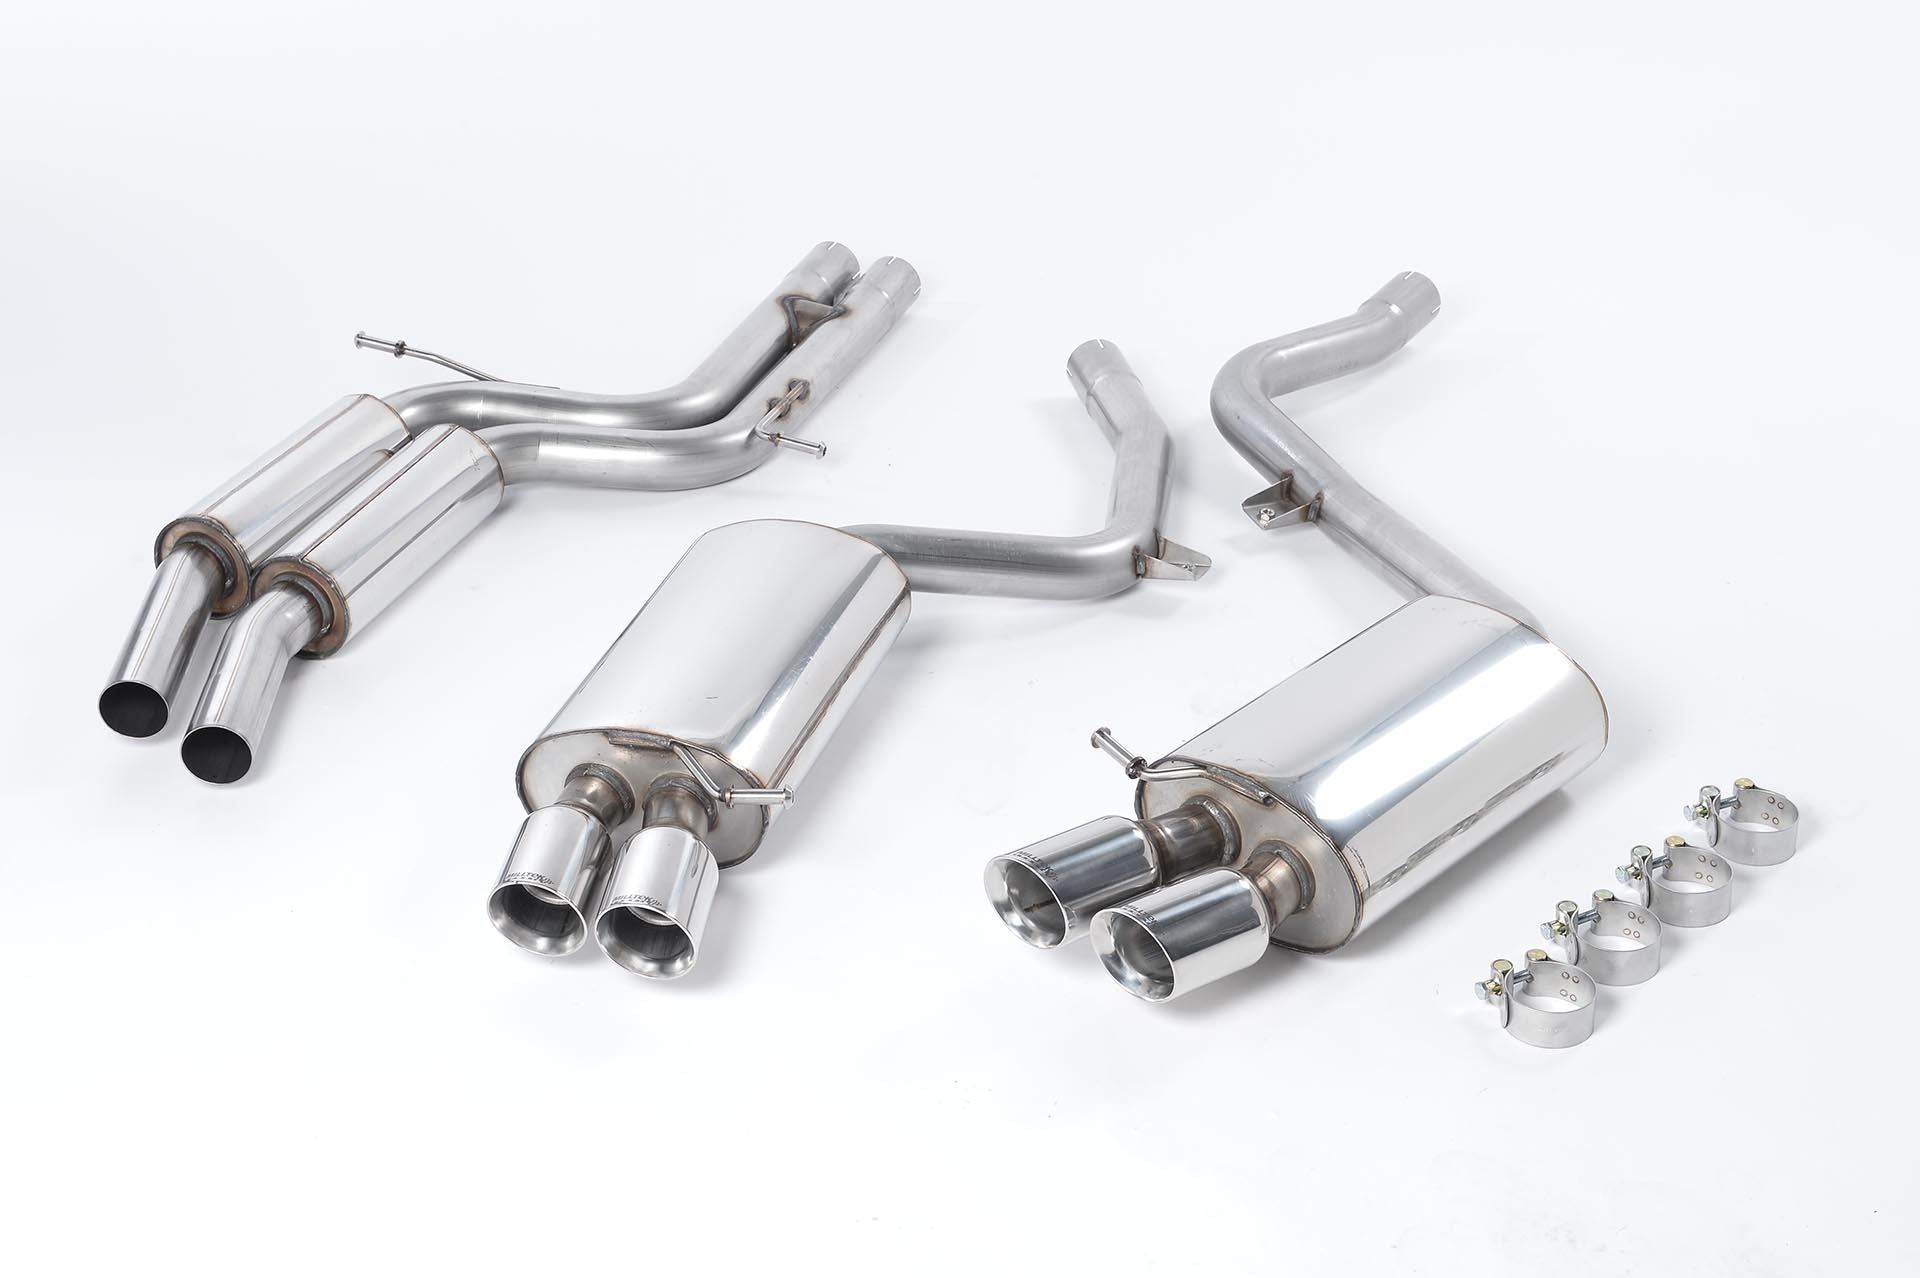 Milltek Catback Exhaust - Audi B8 S5 4.2 Coupe (Manual Only)